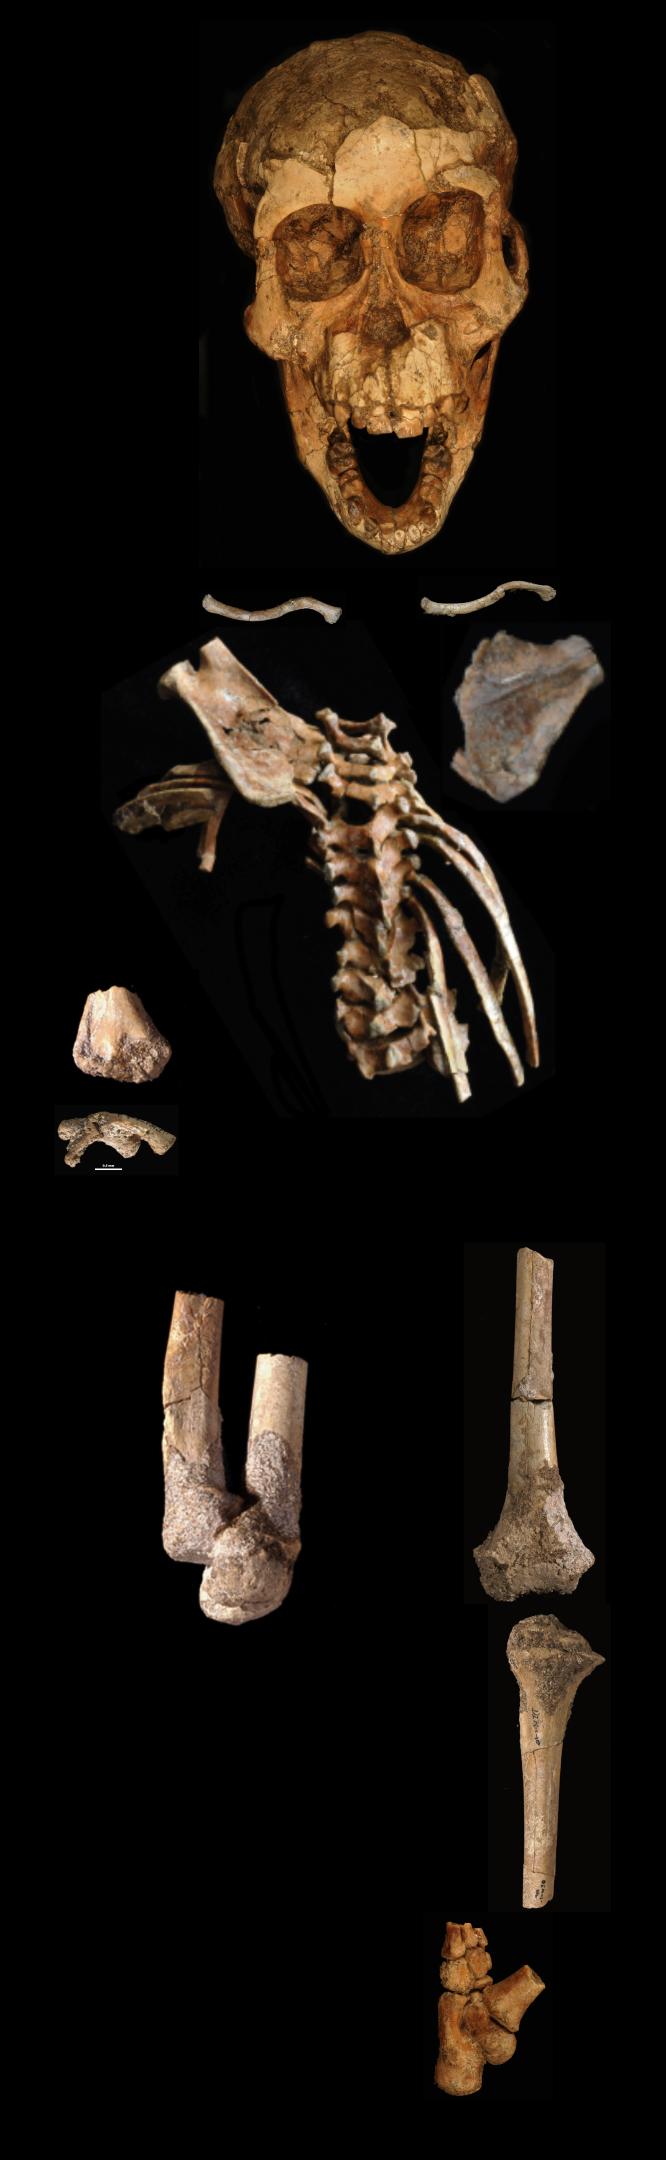 Foot Fossil of Juvenile Hominin Exhibits Ape-Like Features